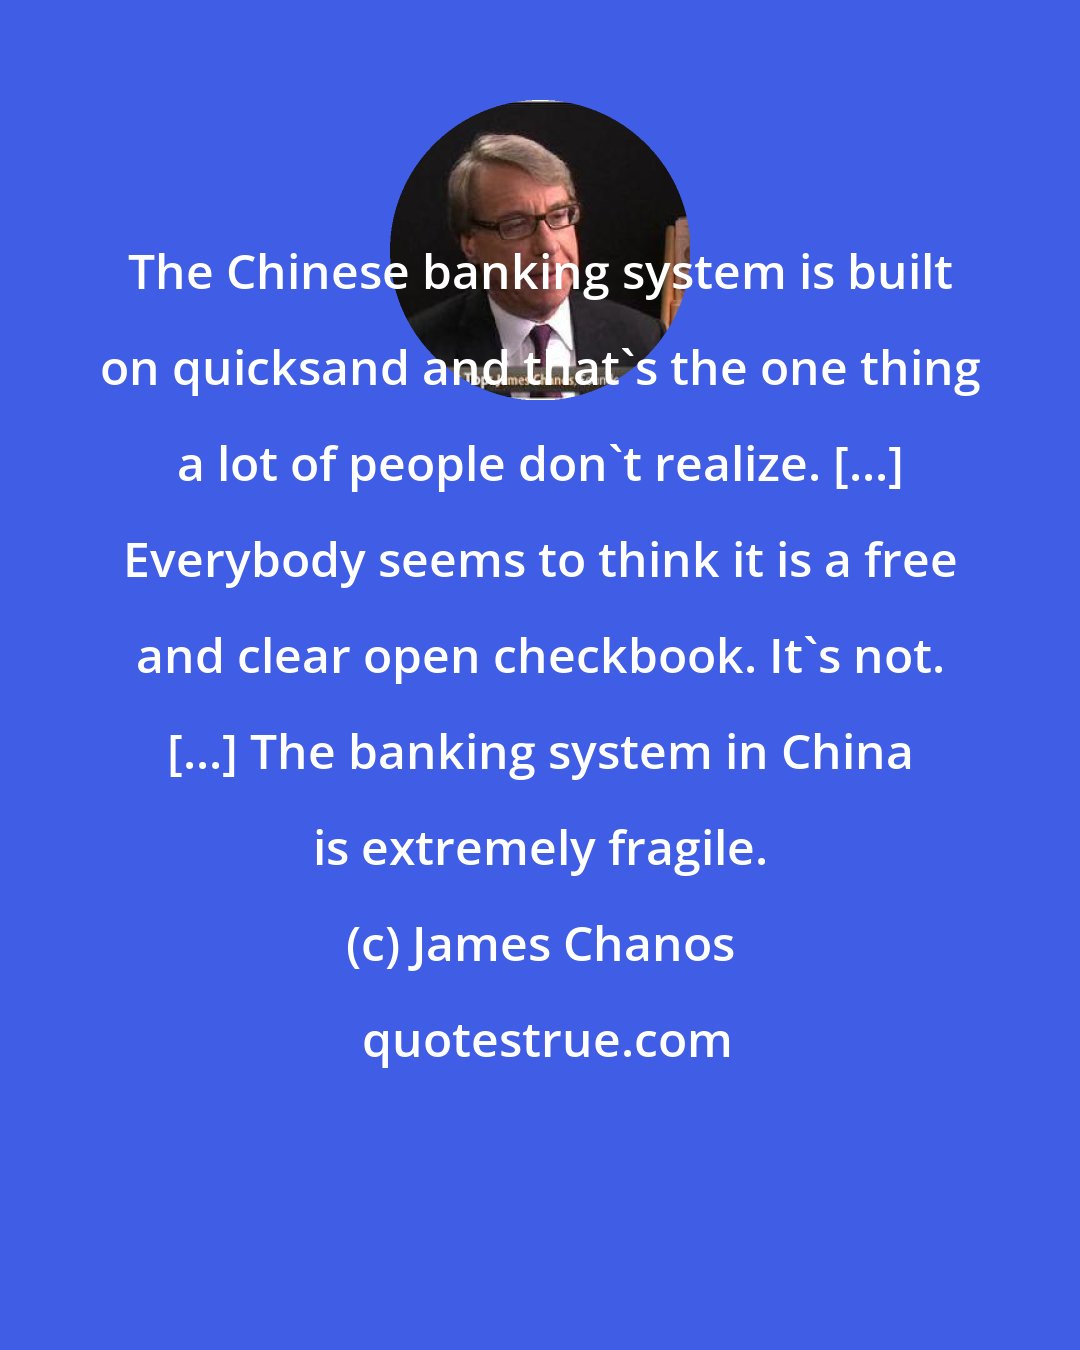 James Chanos: The Chinese banking system is built on quicksand and that's the one thing a lot of people don't realize. [...] Everybody seems to think it is a free and clear open checkbook. It's not. [...] The banking system in China is extremely fragile.